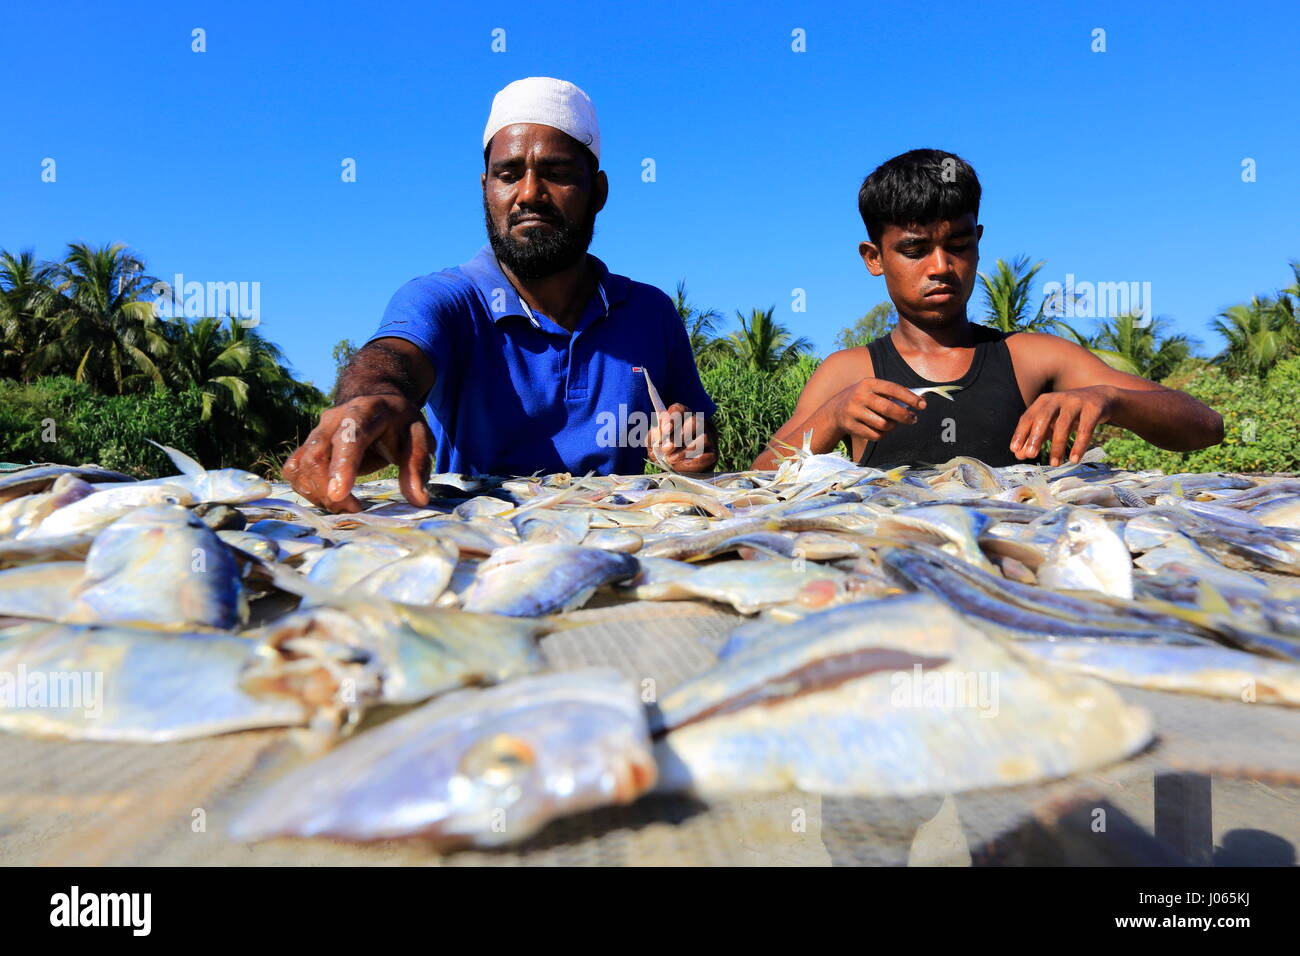 Workers processing fish to be dried at Saint Martin, Locally known as Narikel Jinjira, it is the only coral island of Bangladesh.Coxs Bazar, Banglades Stock Photo